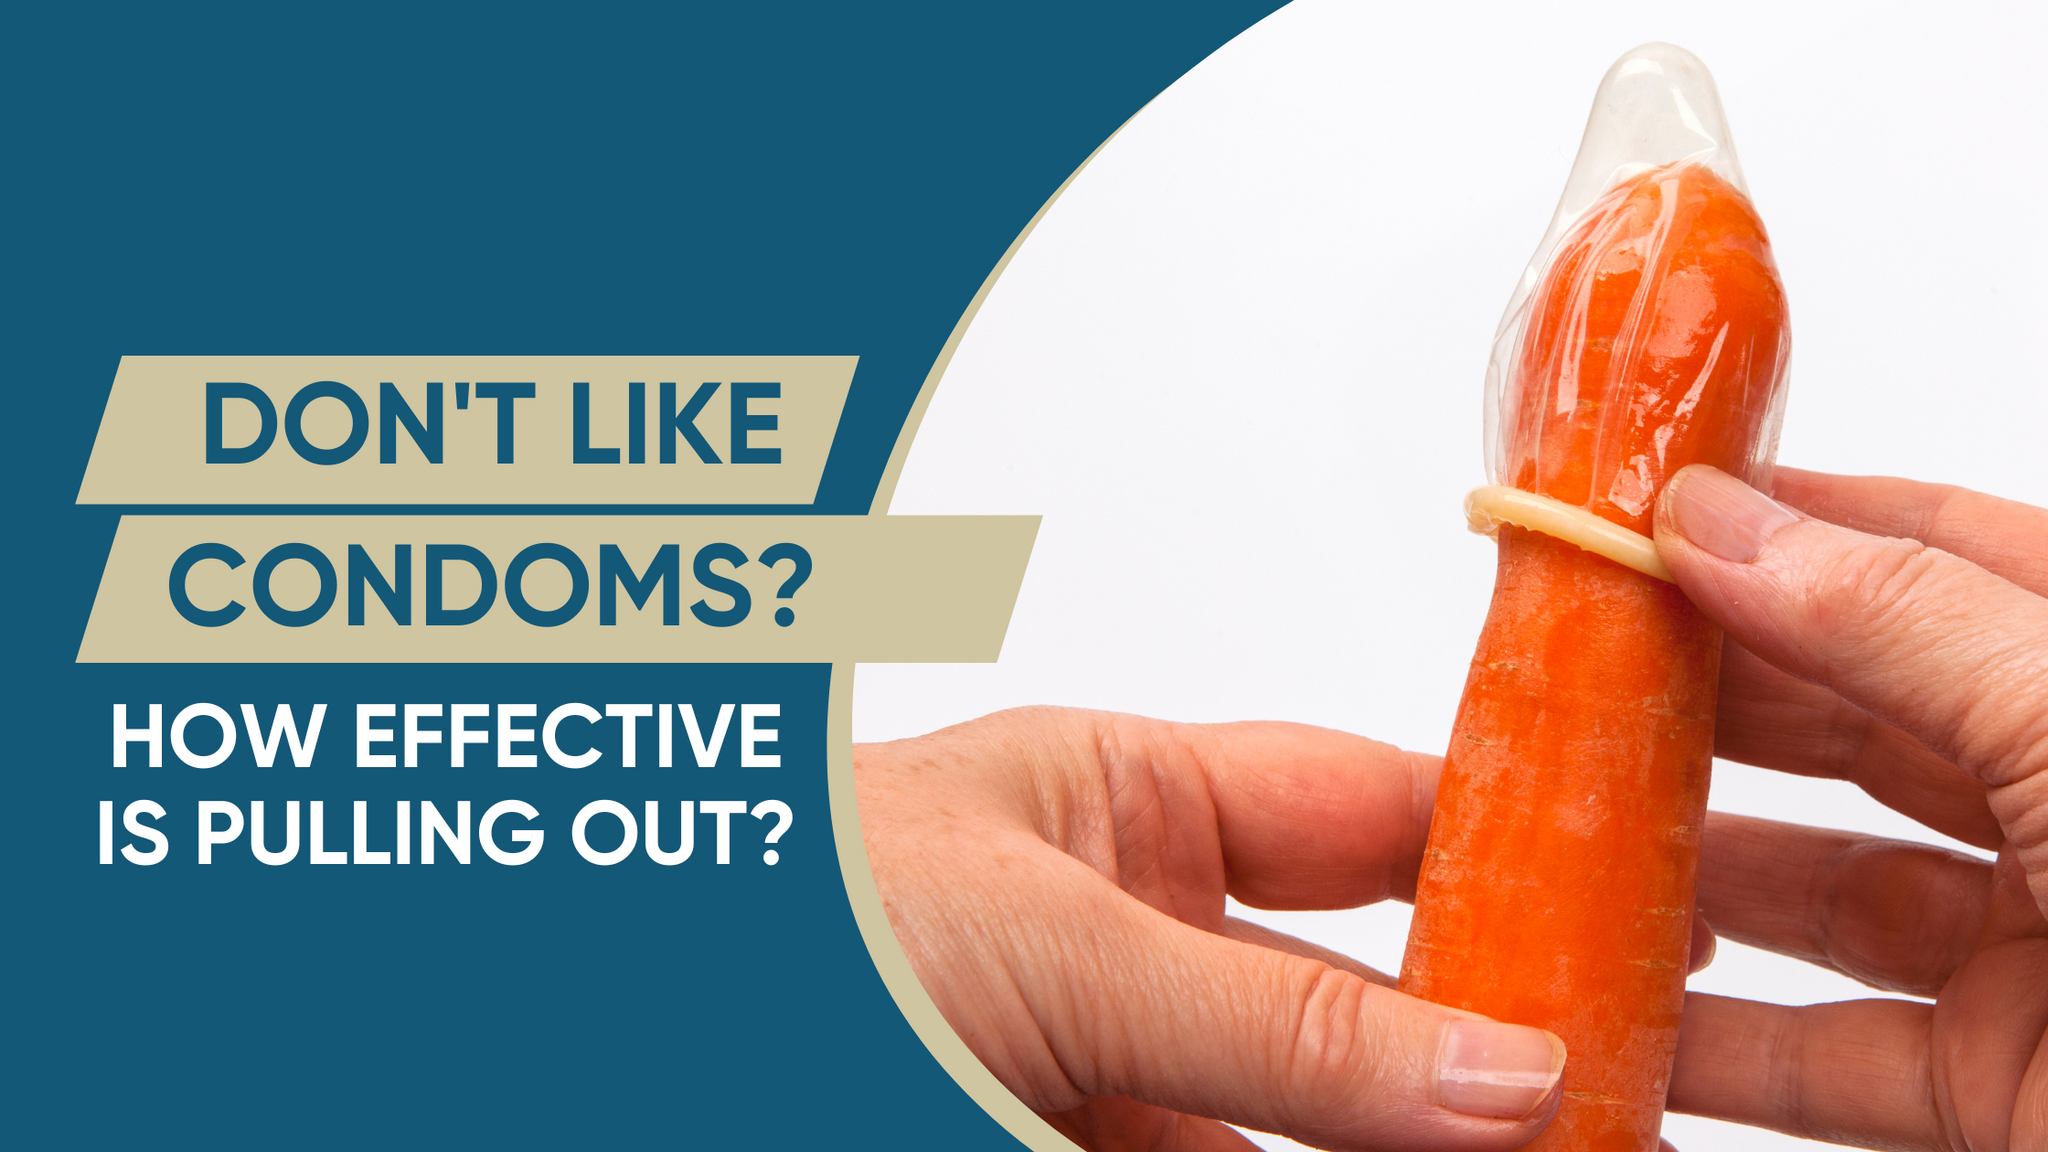 DON'T LIKE CONDOMS? HOW EFFECTIVE IS PULLING OUT?